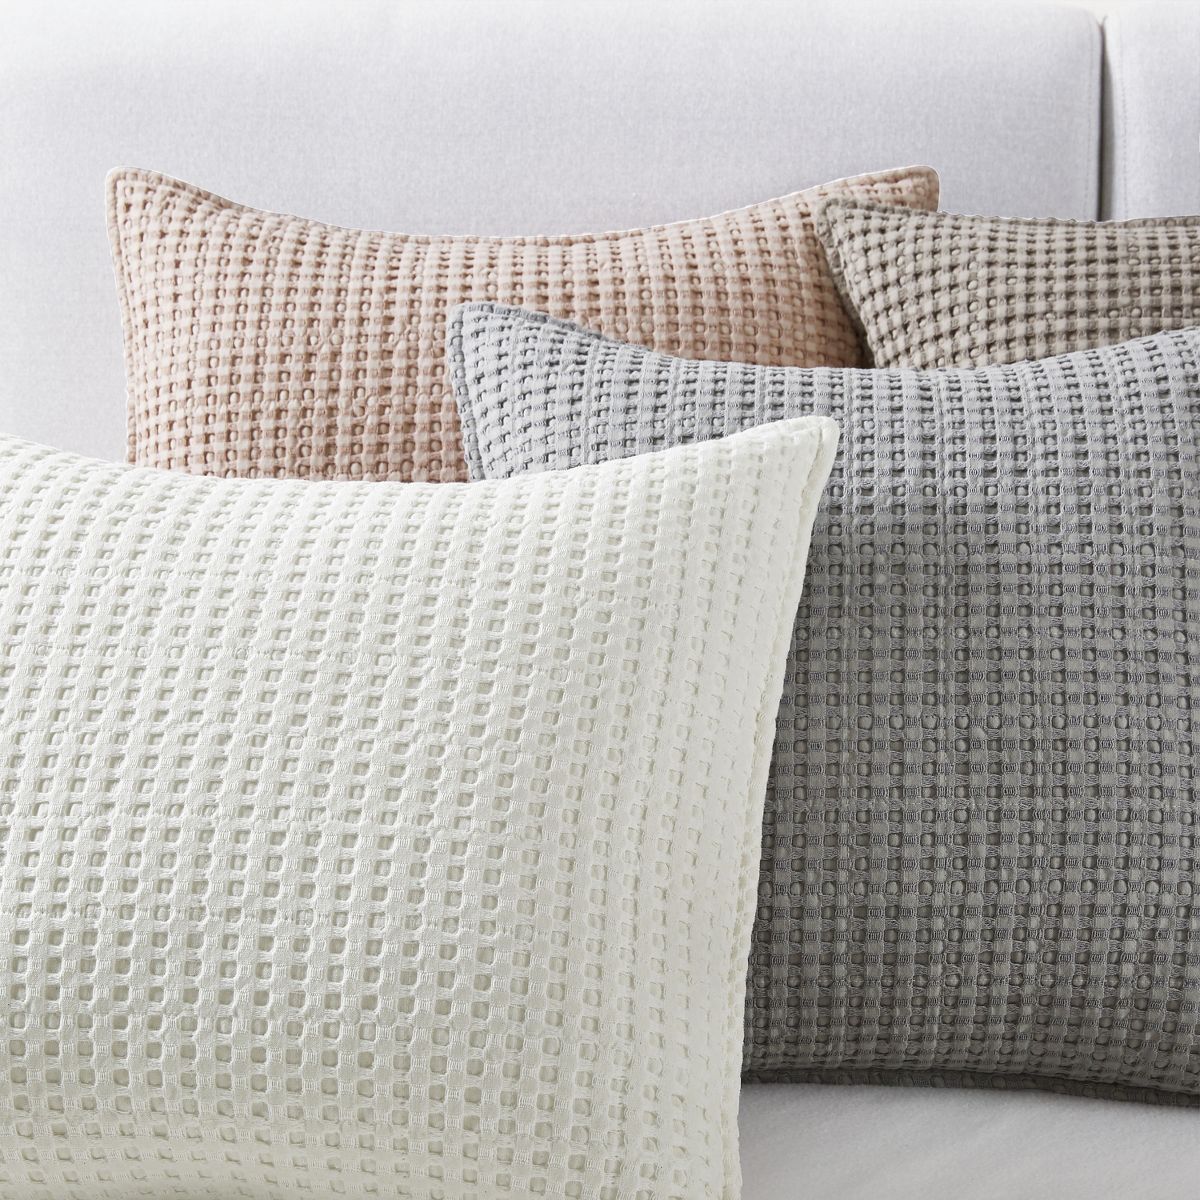 Mills Waffle Square Decorative Pillow - Levtex Home | Target